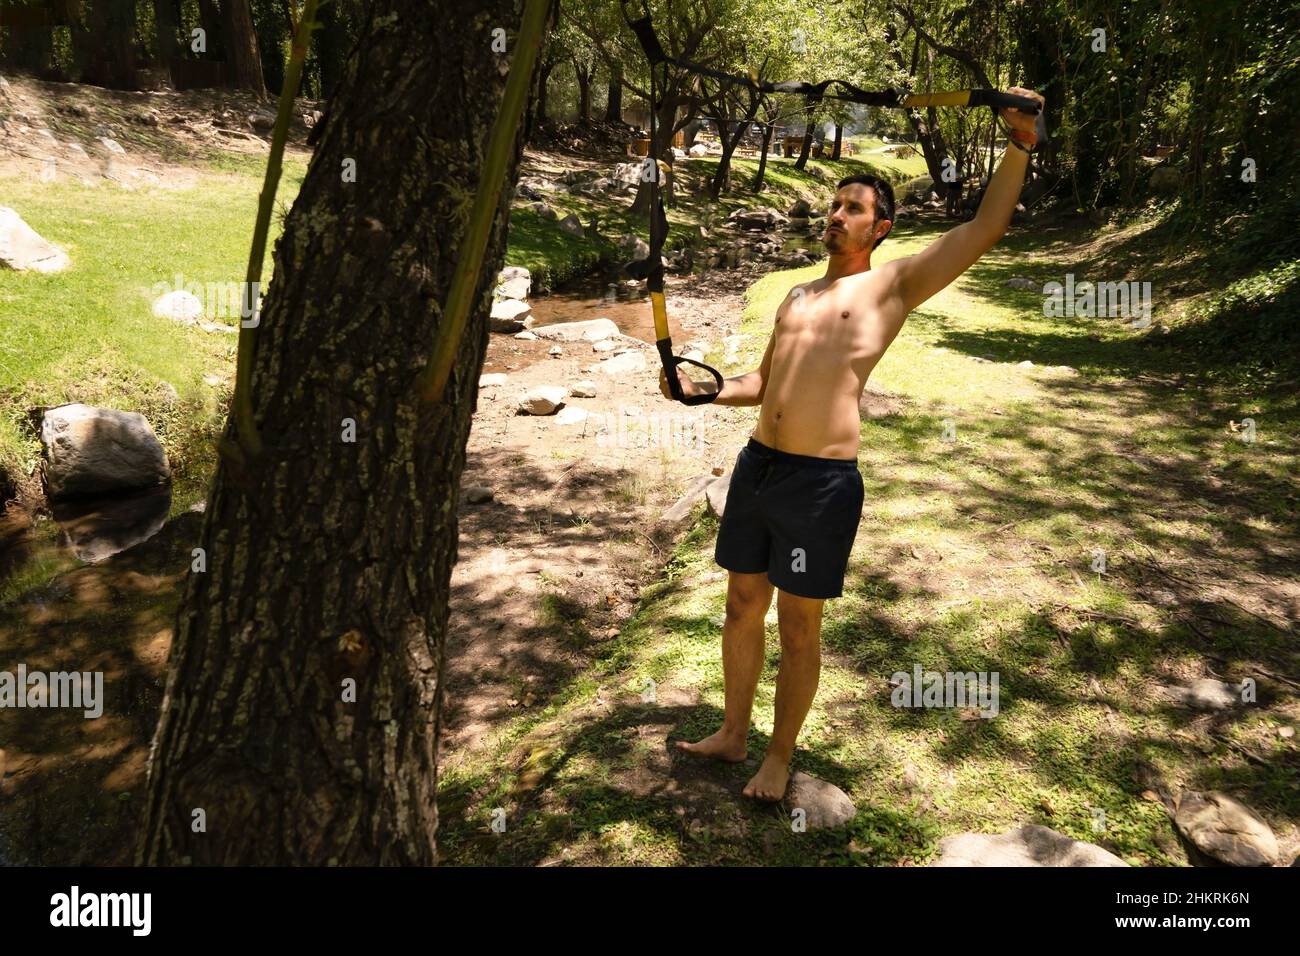 Handsome muscular man is training outdoor on TRX. Total Body Resistance Exercises. Stock Photo